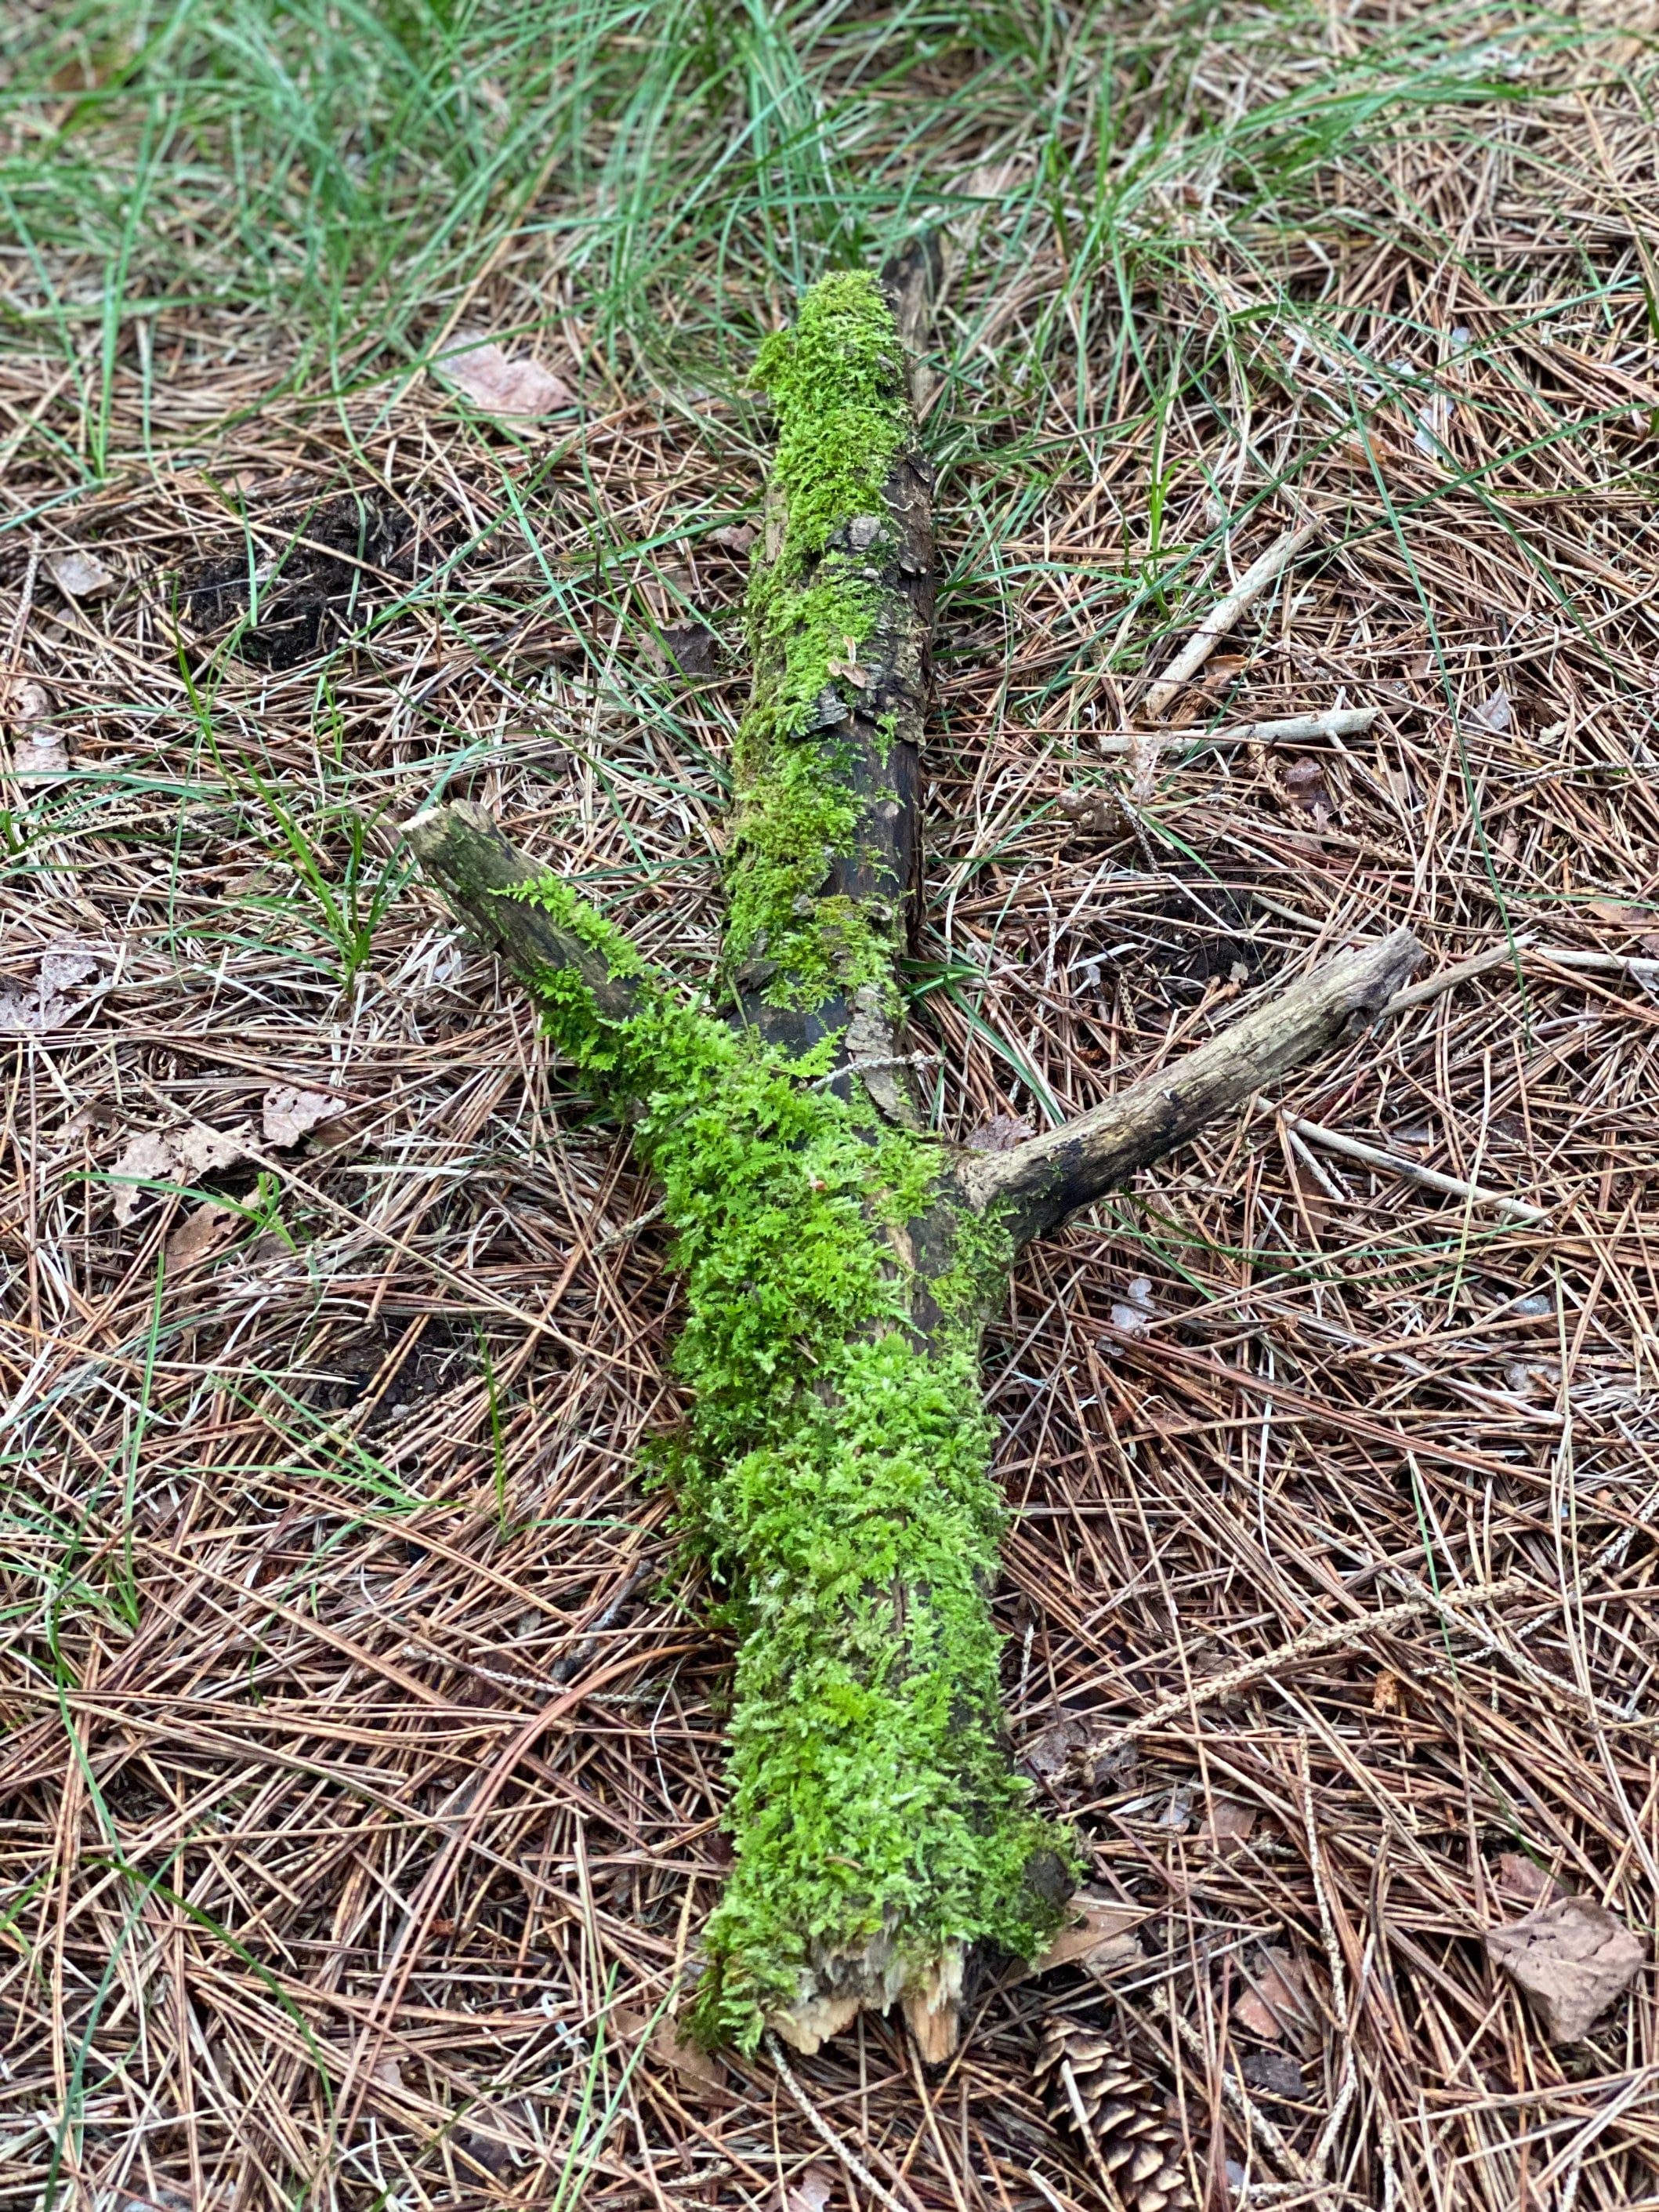 Moss Covered Log, Mossy Log, 19 Inches Long by 9 Inches Wide and 2 Inches High